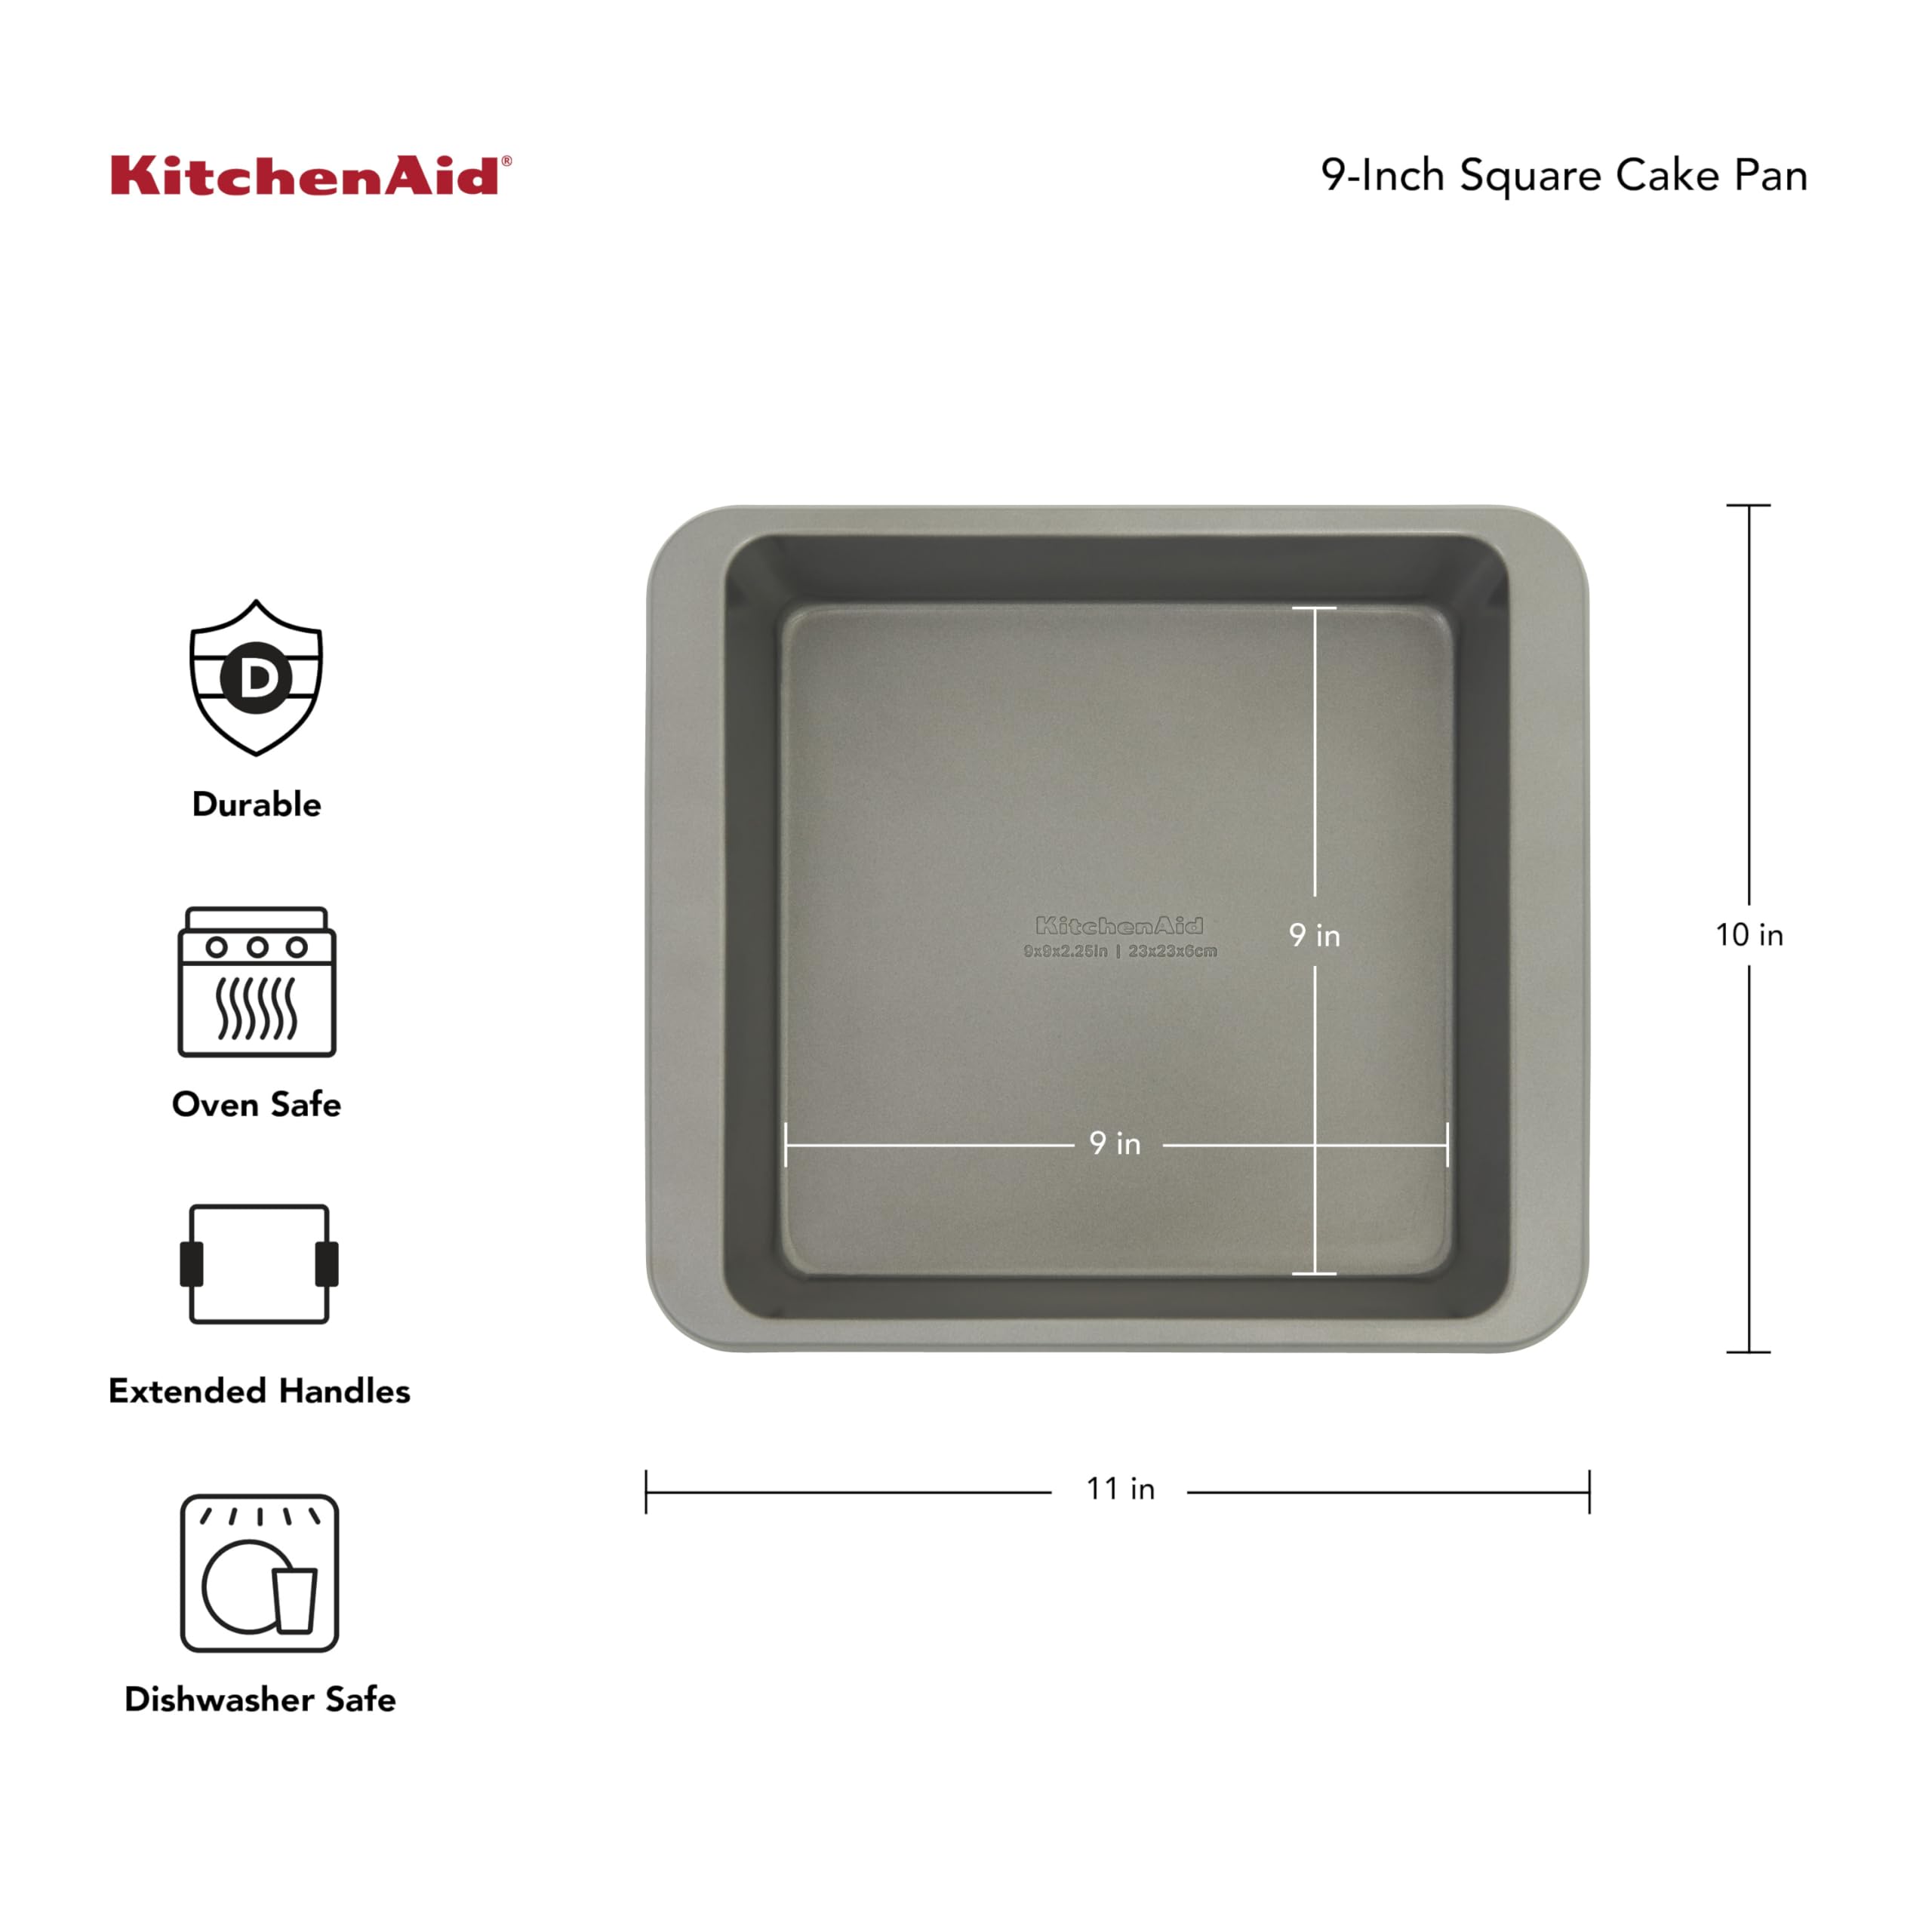 KitchenAid Nonstick 9 in Square Cake Pan with Extended Handles for Easy Grip, Aluminized Steel to Promoted Even Baking, Dishwasher Safe